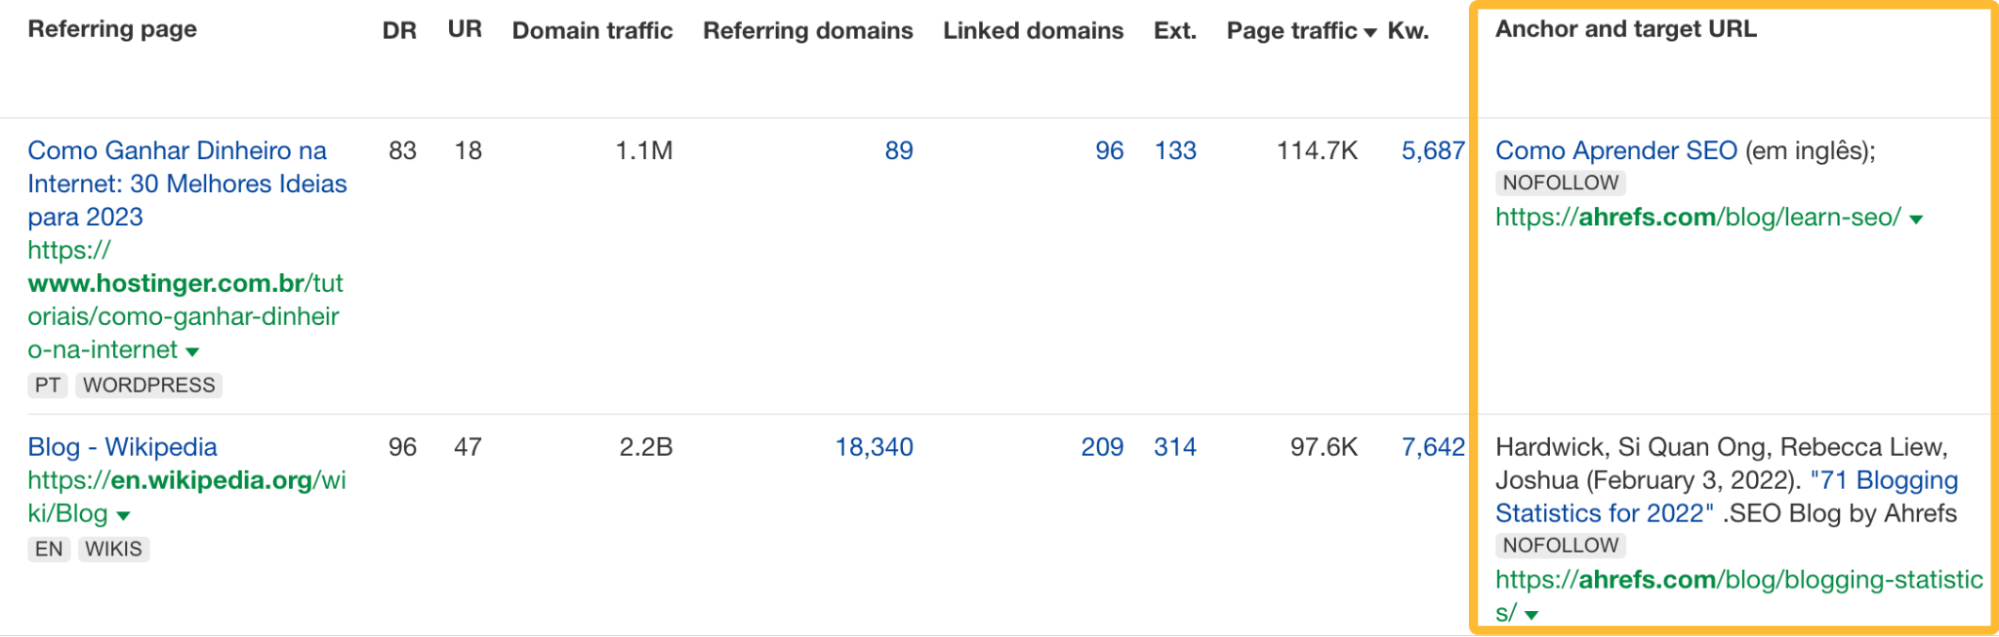 Checking the anchor text of backlinks in Backlinks report, via Ahrefs' Site Explorer